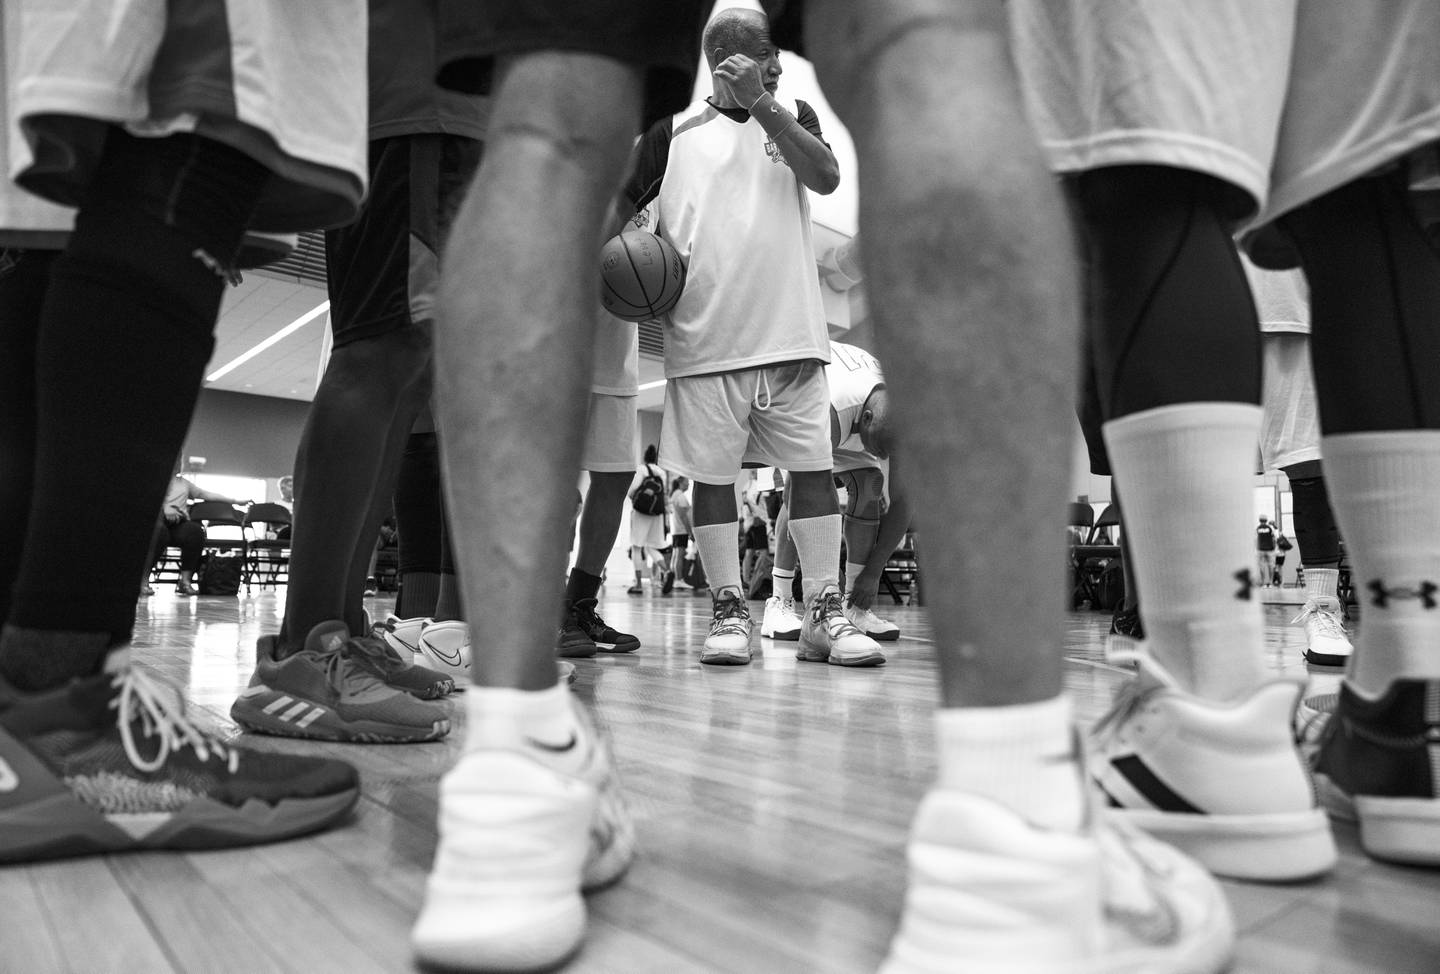 Baby Boomer’s George Pruden of Maryland meets with his team before competing in basketball at the National Senior Games at the David L. Lawrence Convention Center, in Pittsburgh, Friday, July 7, 2023.